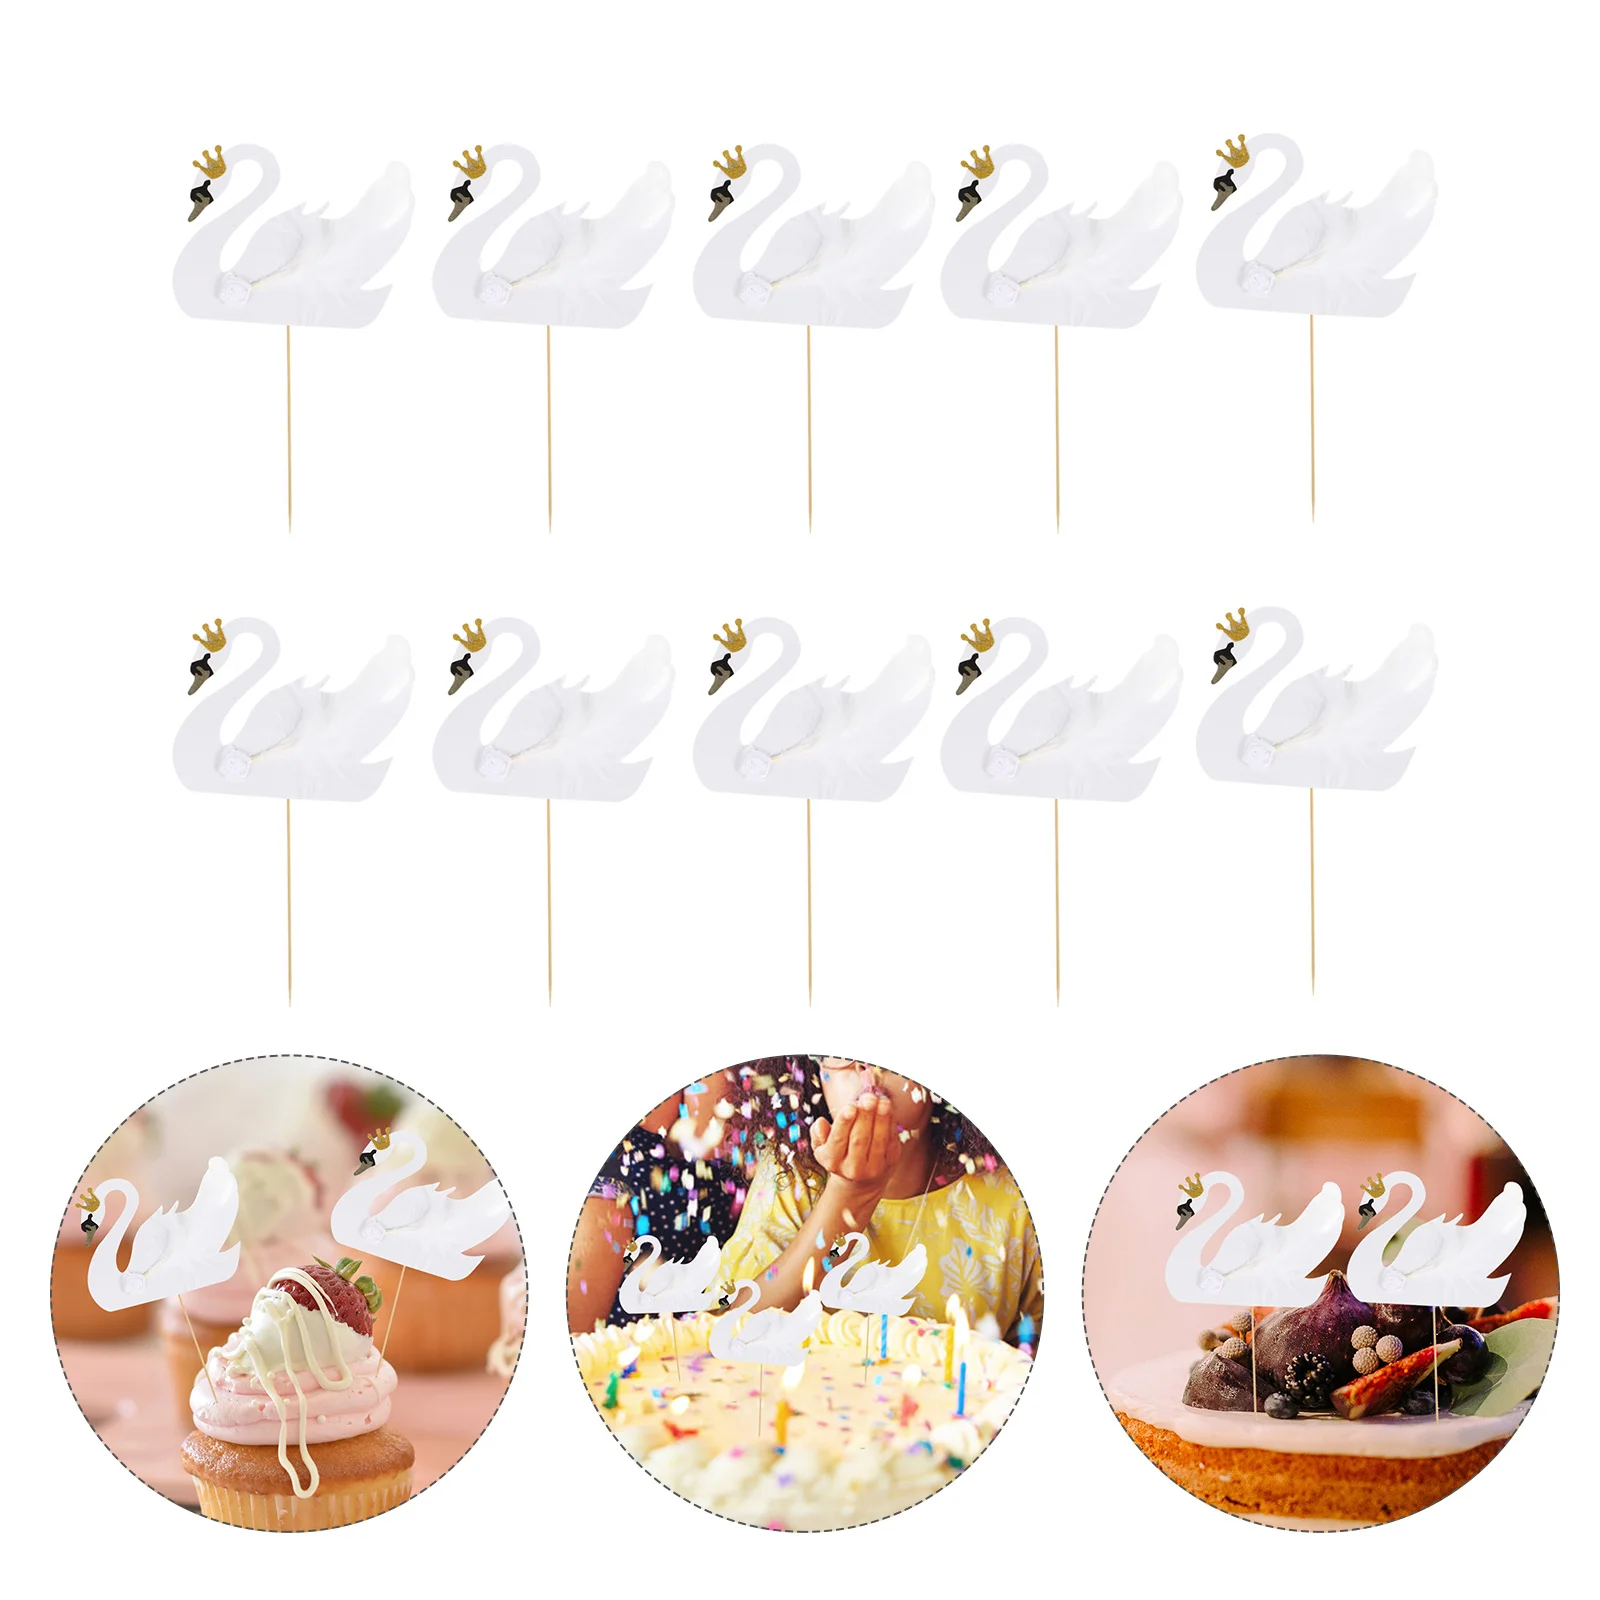 

10PCS swan cupcake toppers birthday party cake topper wrappers- Cake Topper Swan Elegant Cupcake Picks Dessert- Topper Insert